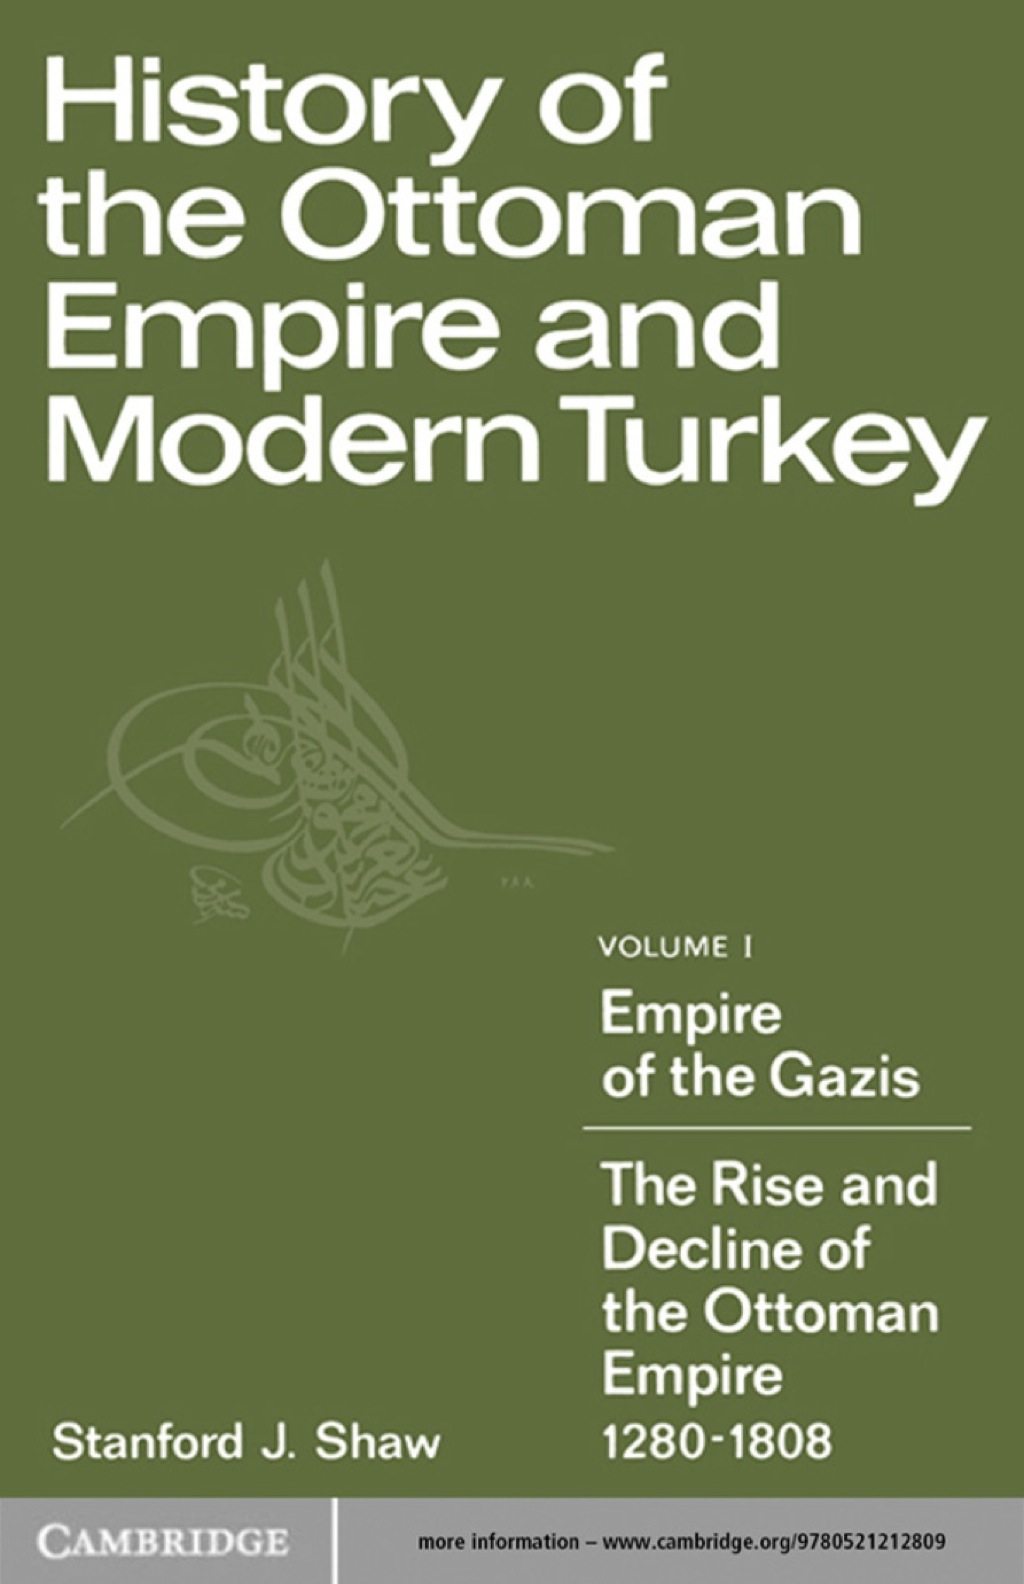 History of the Ottoman Empire and Modern Turkey: Volume 1  Empire of the Gazis: The Rise and Decline of the Ottoman Empir (eBook) - Stanford J. Shaw